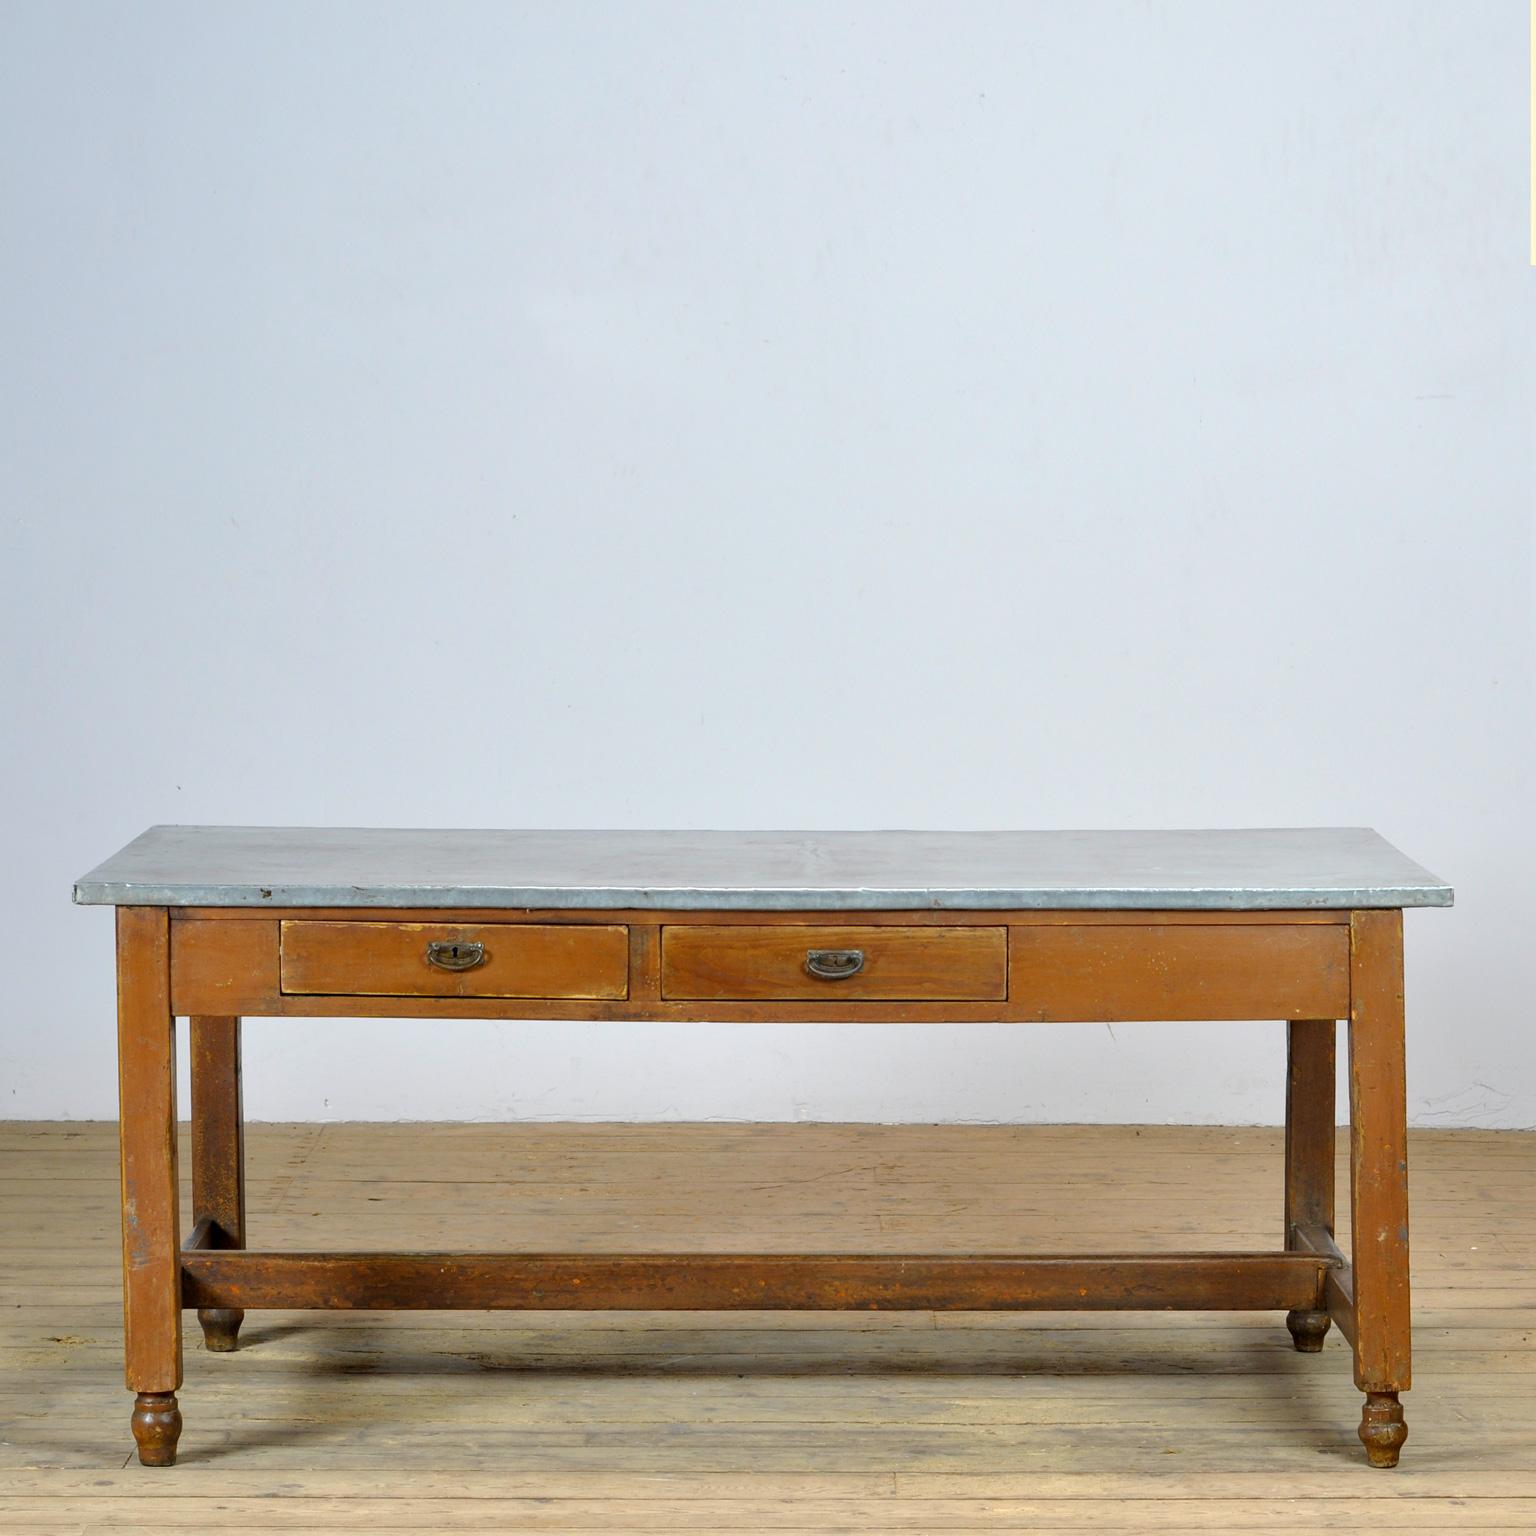 A pine work table with its original zinc top. The table has three drawers. The table was produced in France around 1930. The wood has its original naturally weathered varnish.